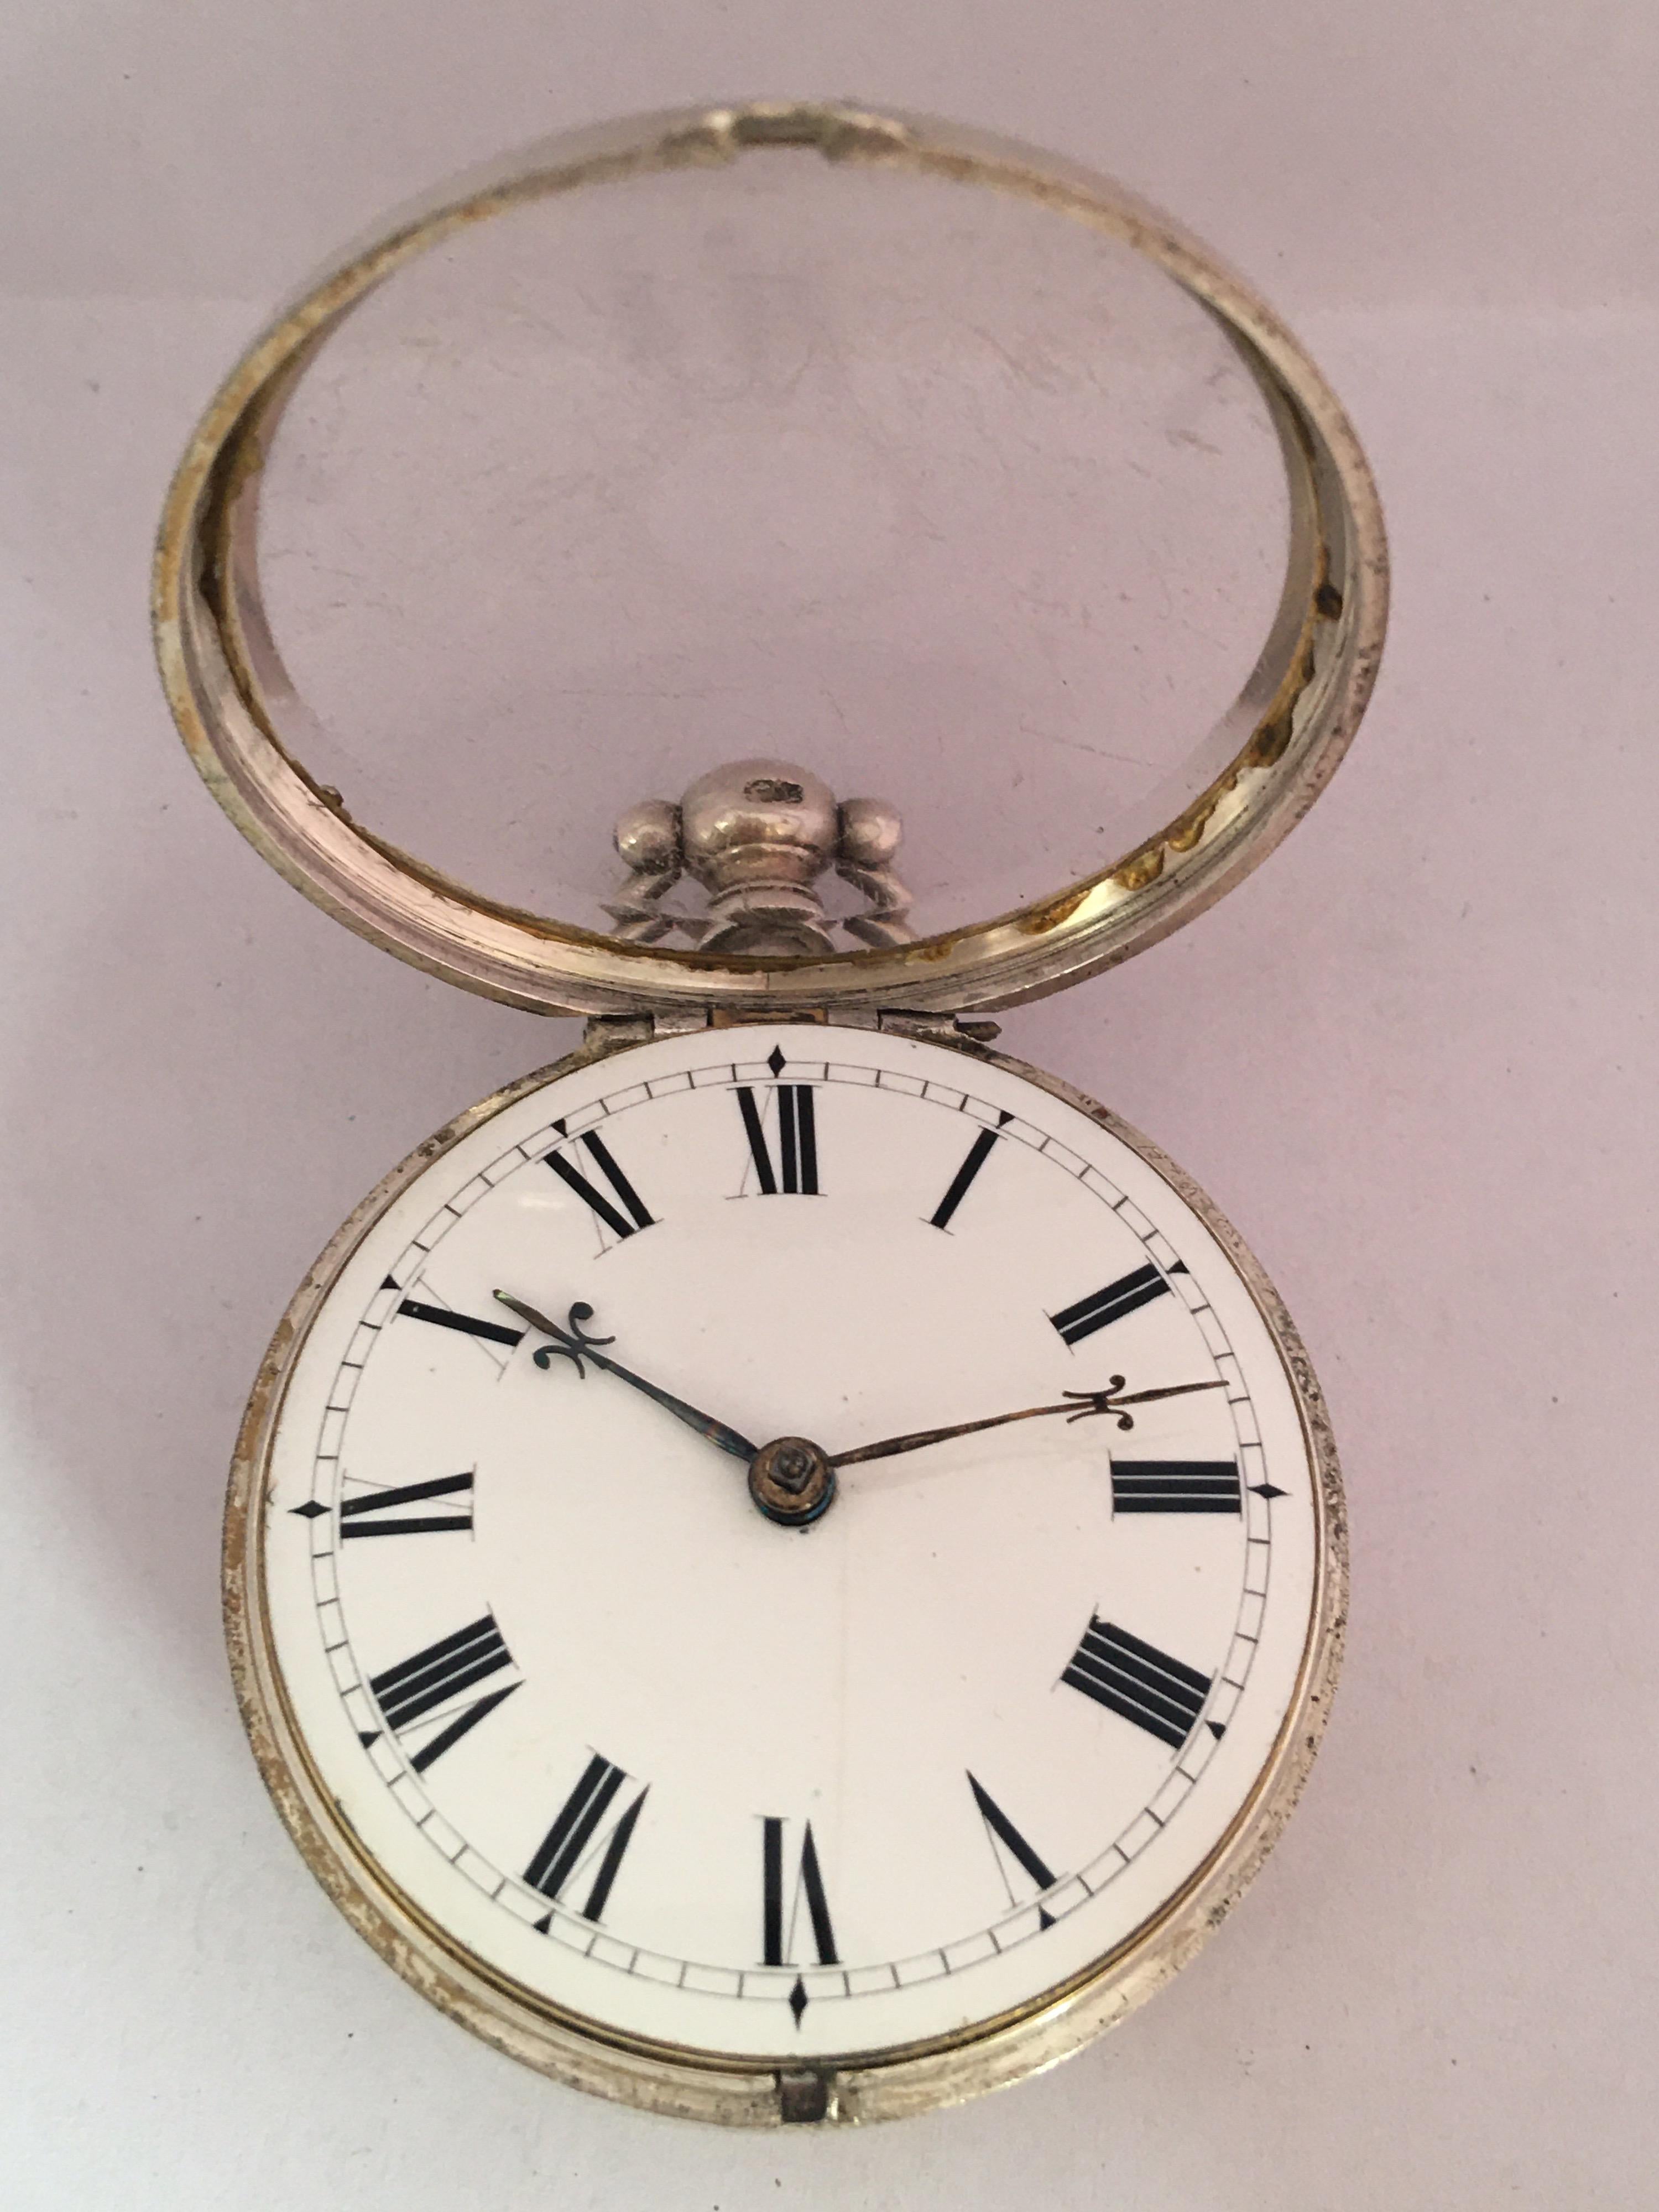 Rare and Early English Silver Pair of Cased Verge Fusee Pocket Watch For Sale 2